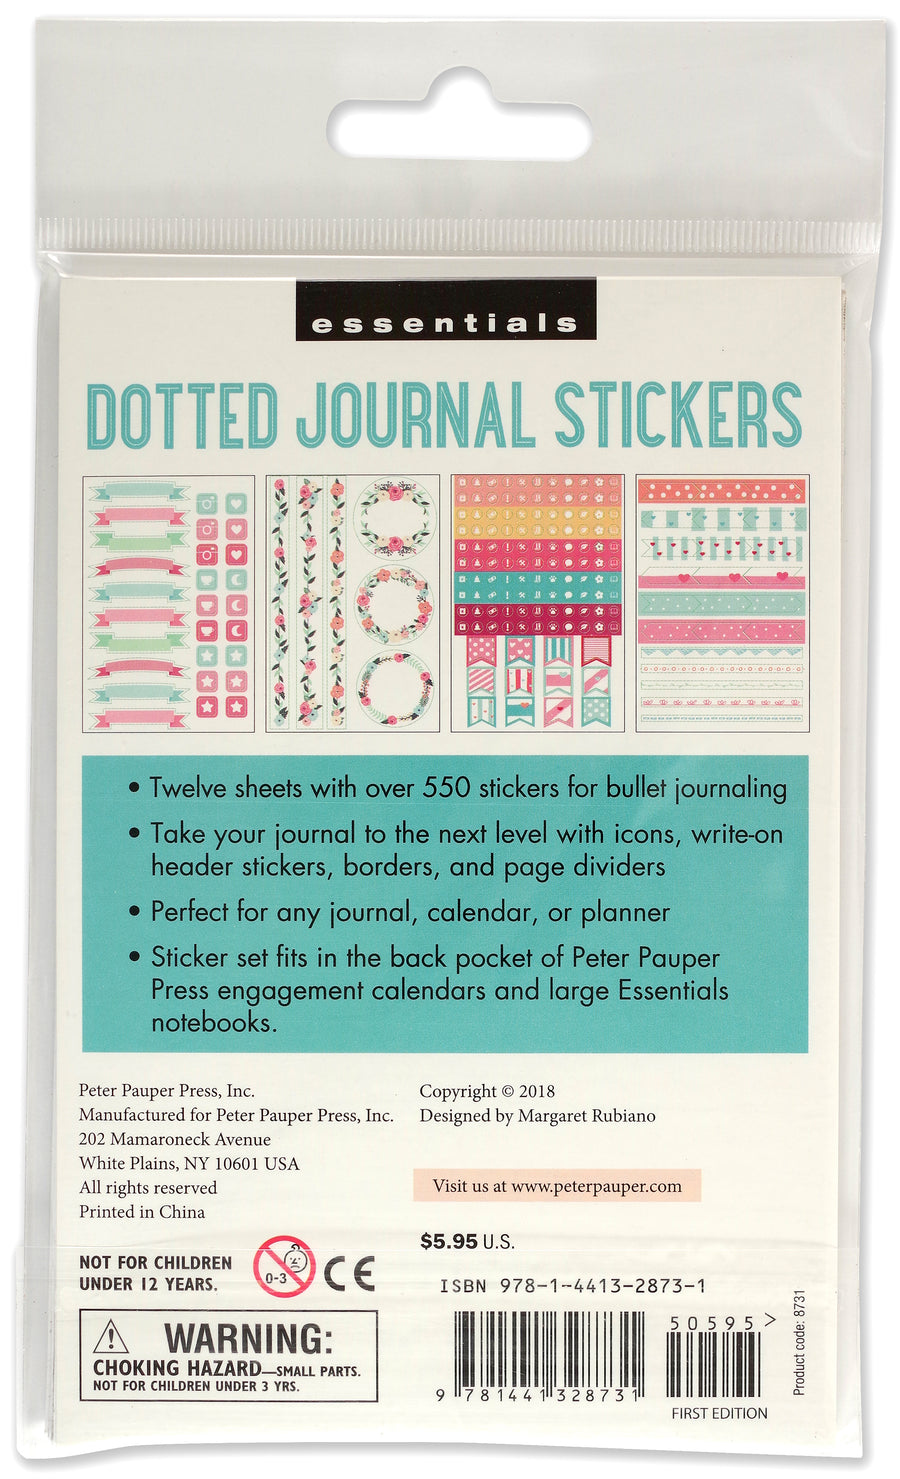 DOTTED JOURNAL STICKERS